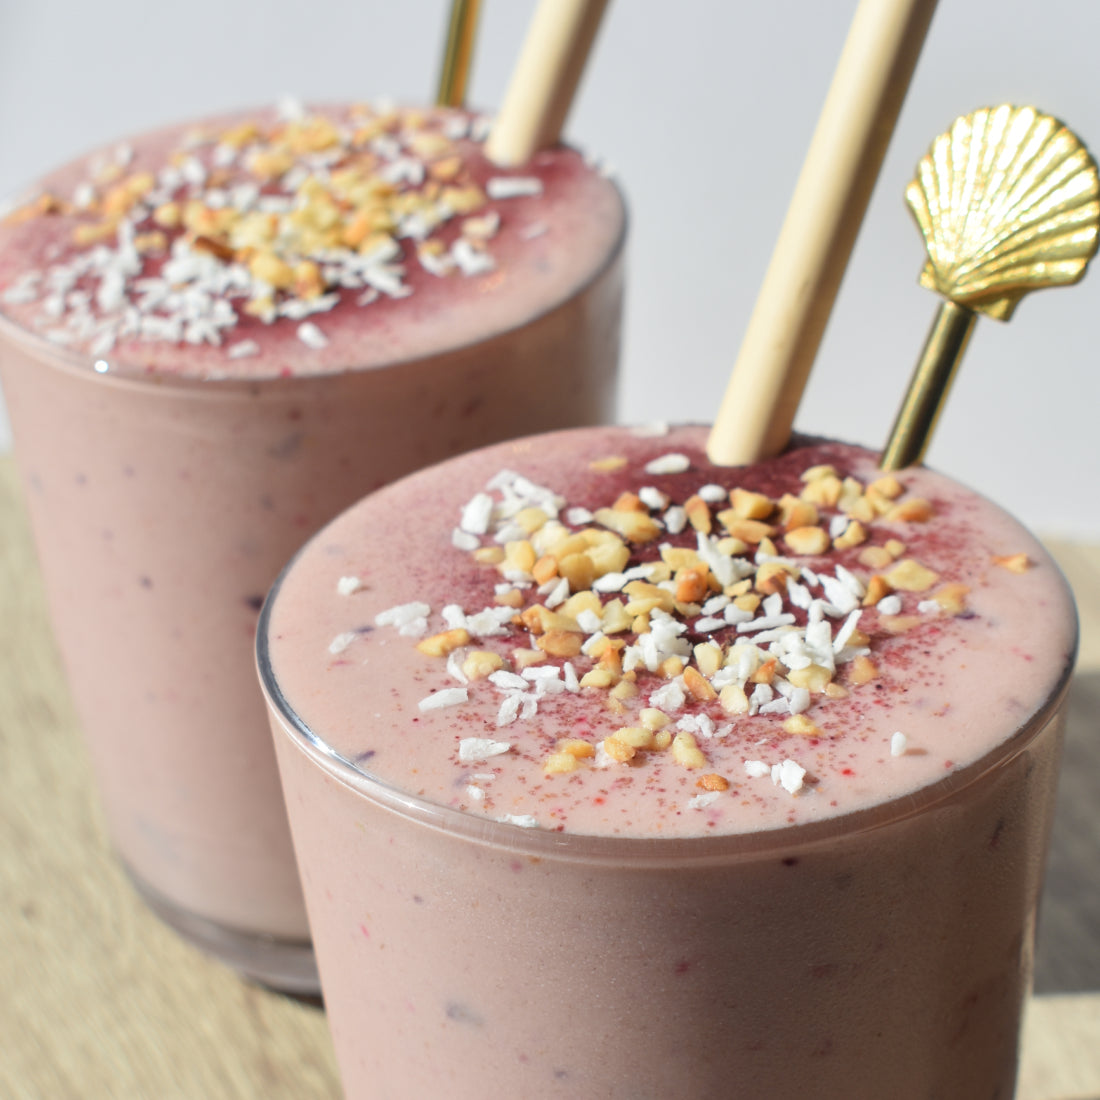 Collagen boosting smoothie with superfoods